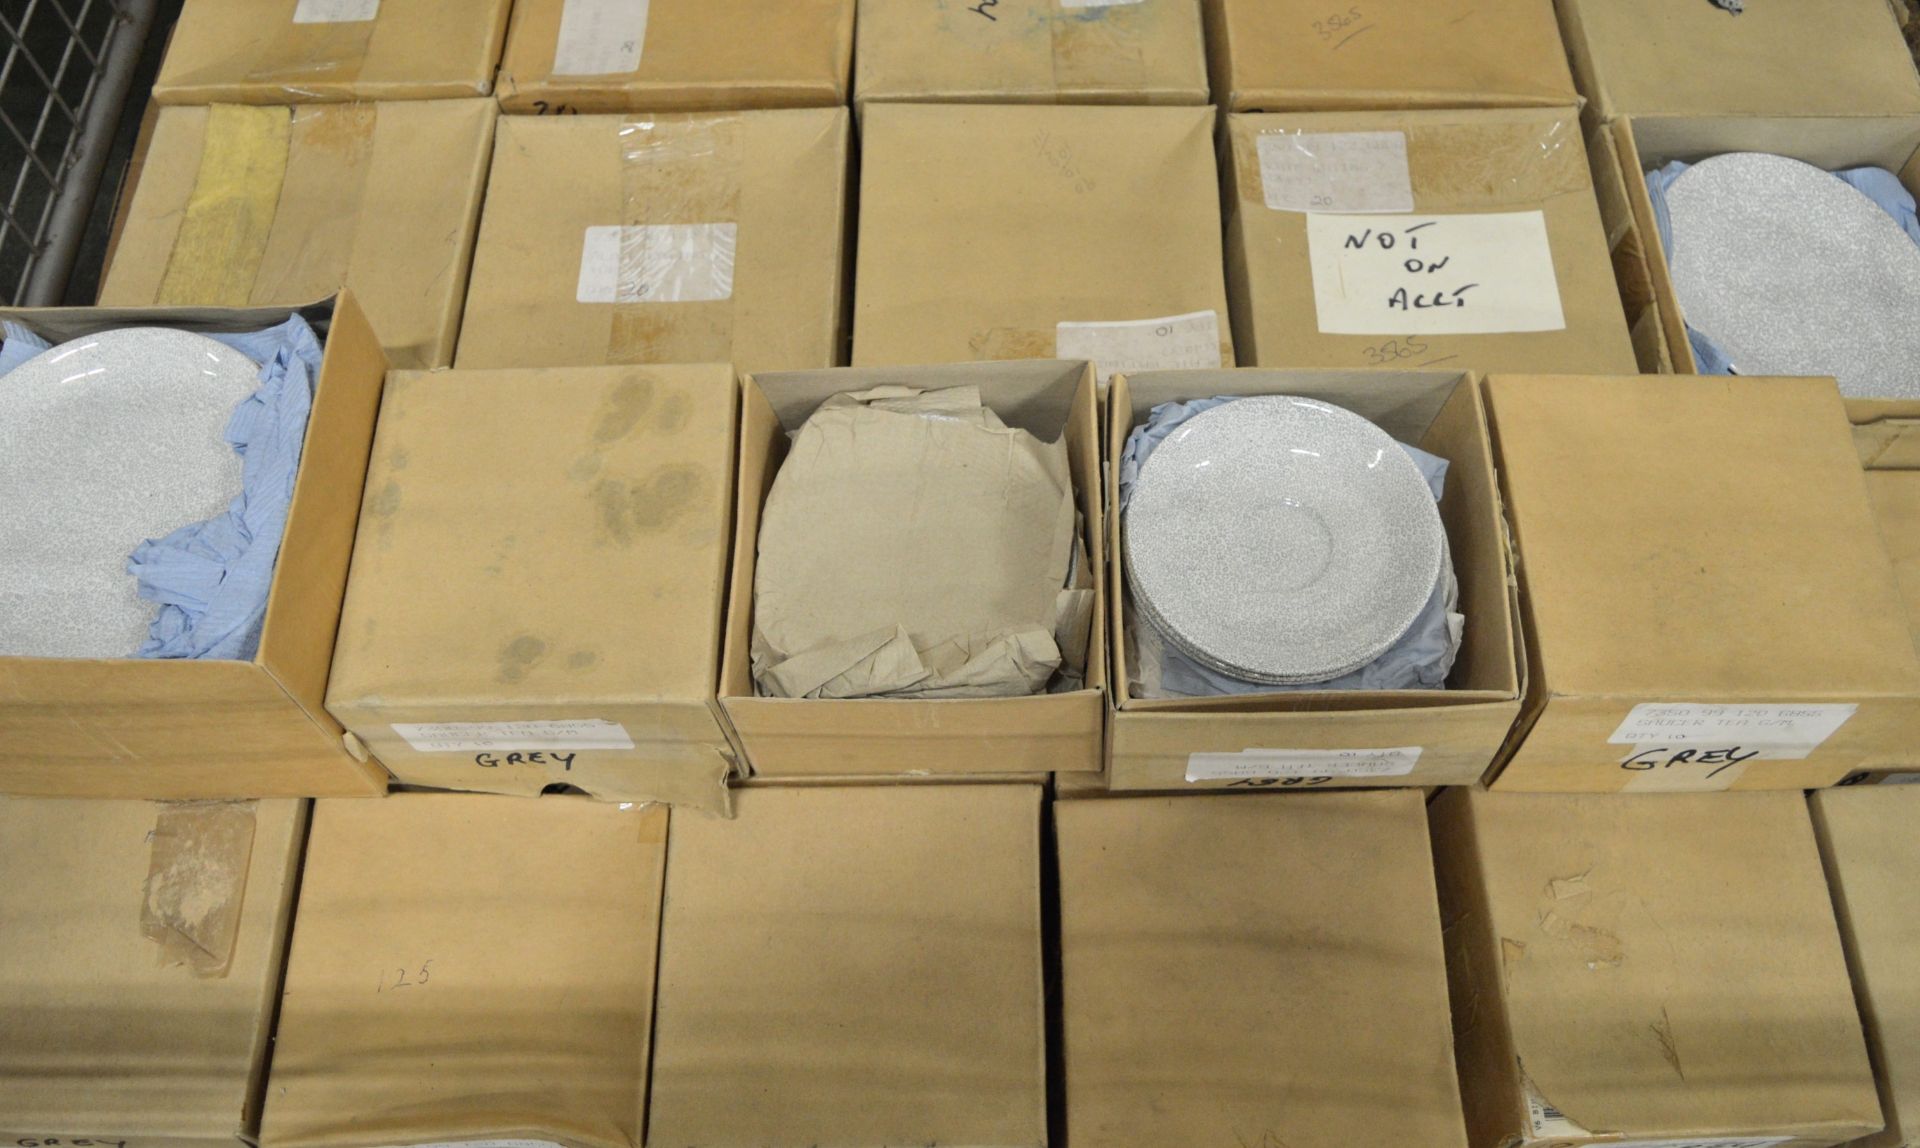 27x Boxes of Plates & Saucers. - Image 2 of 3